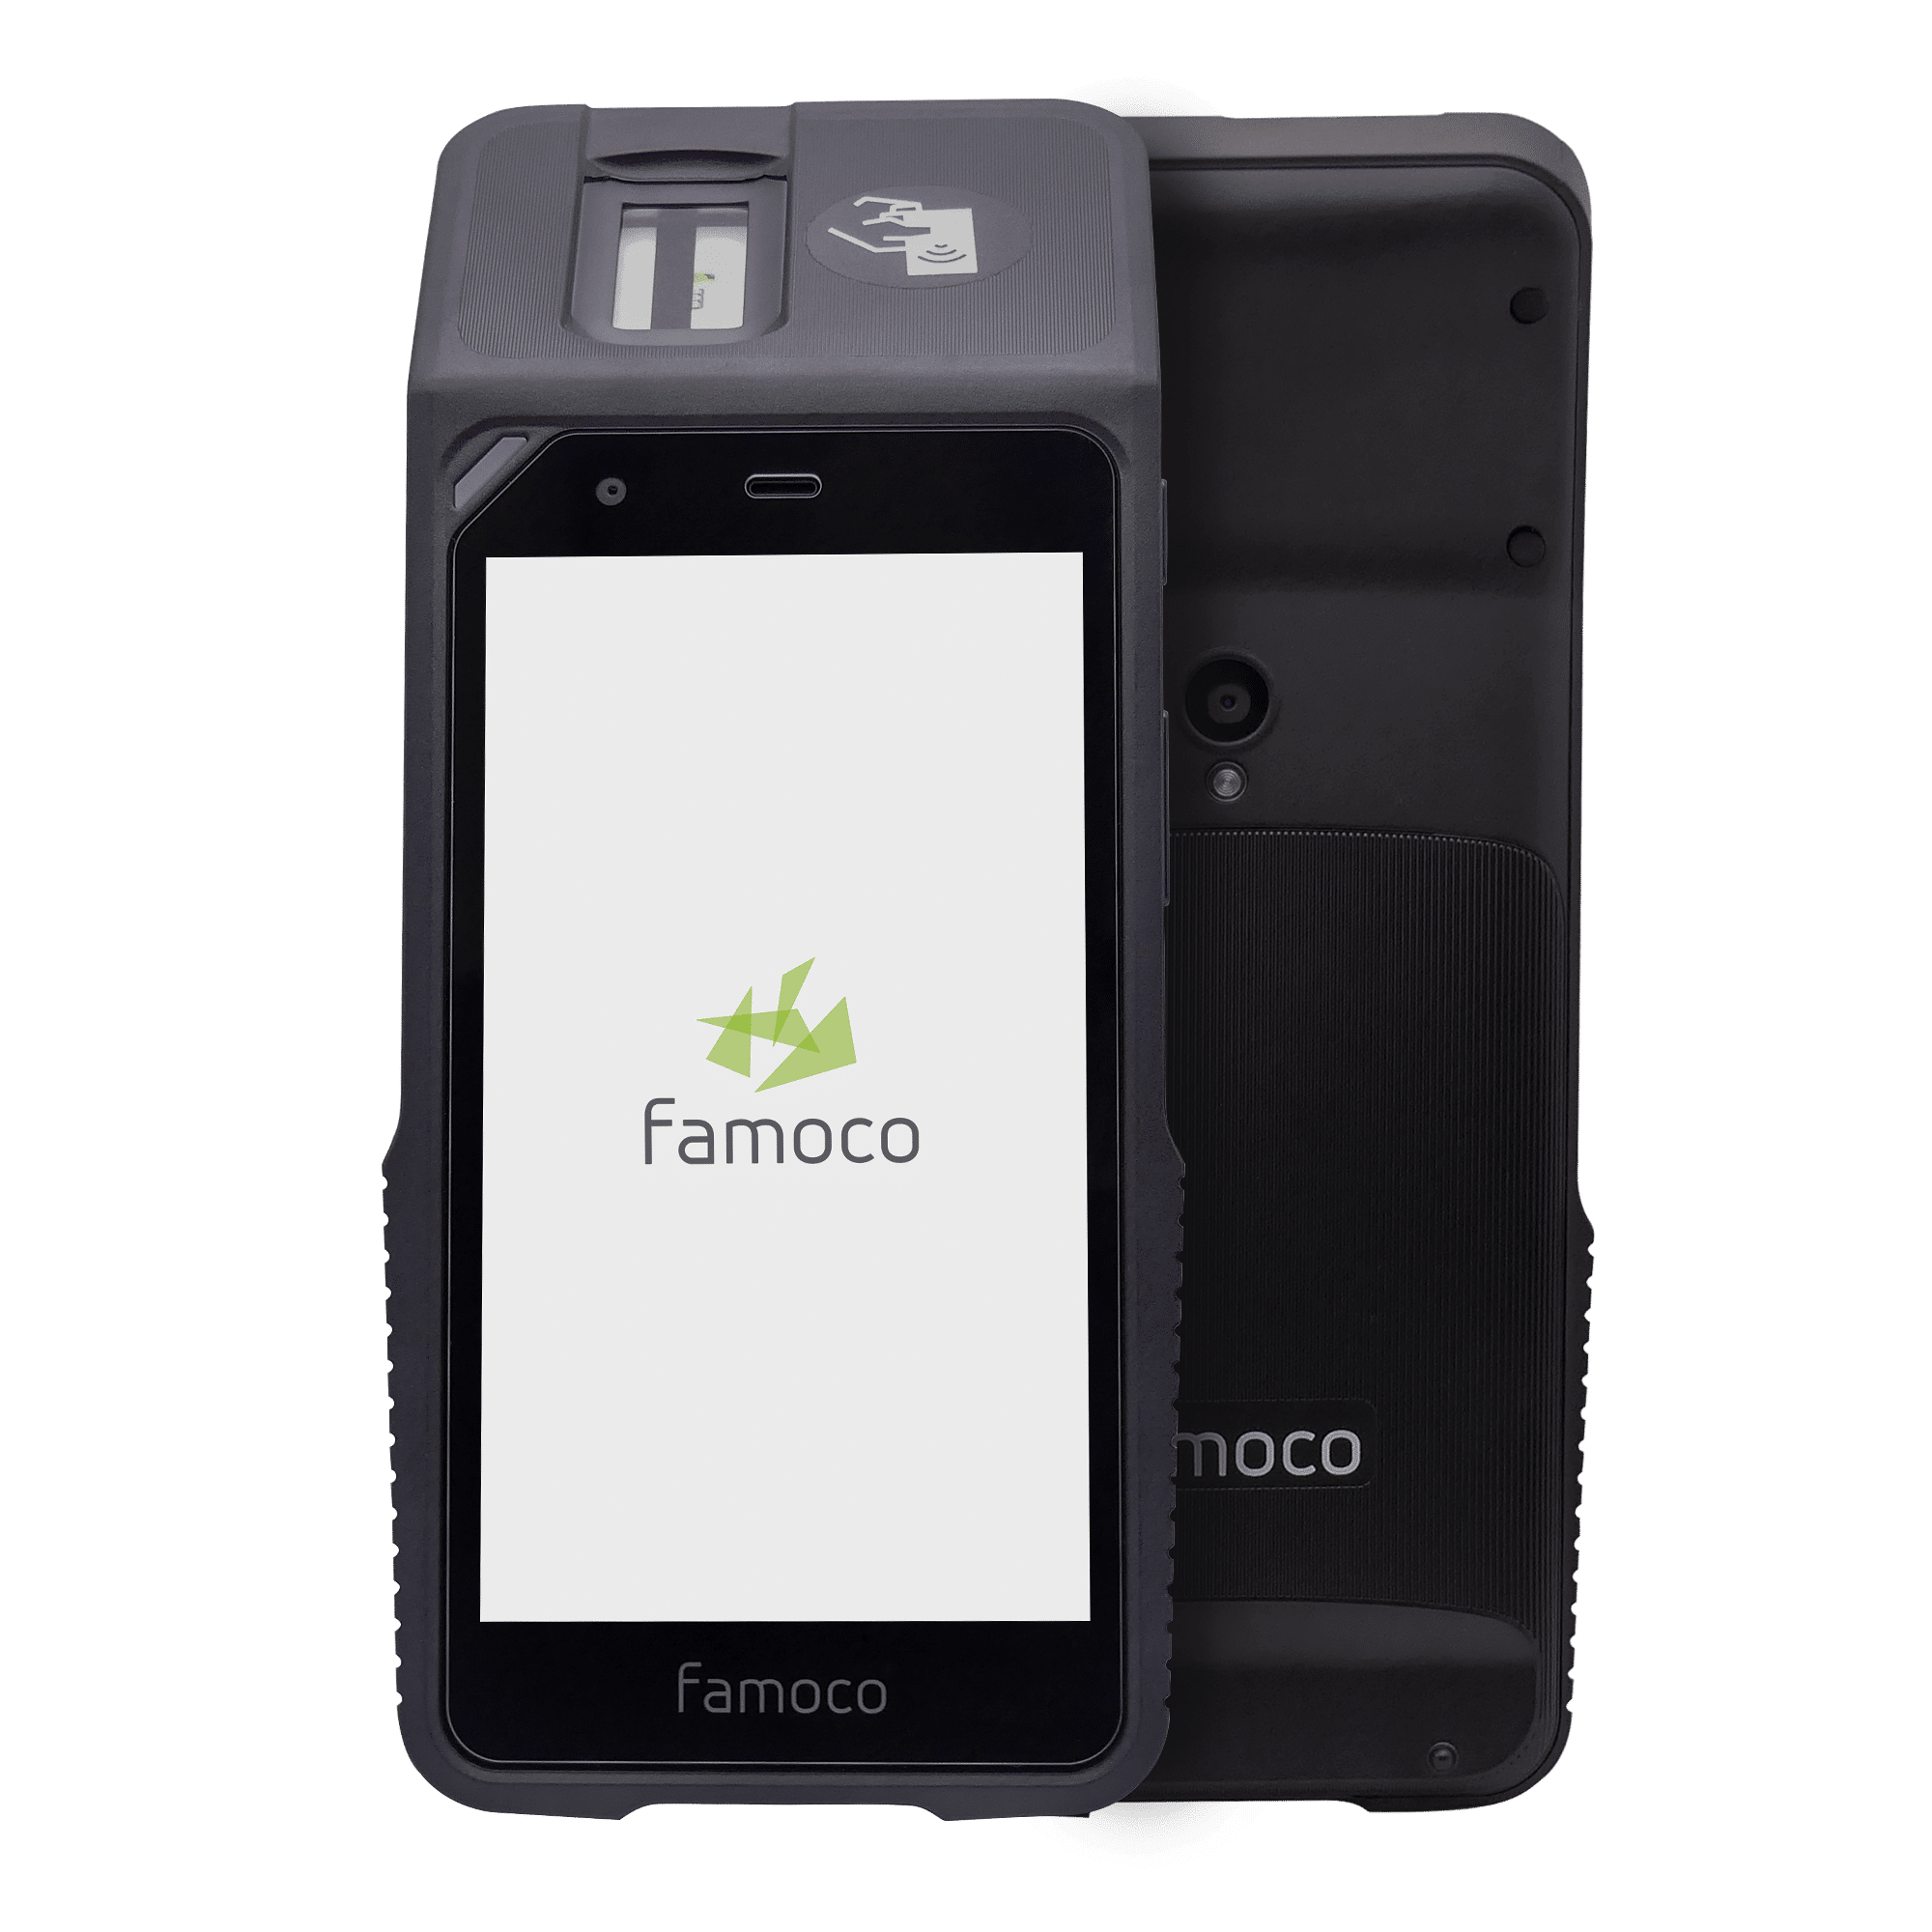 FX205 : Reliable Android device for business tasks | Products | Famoco